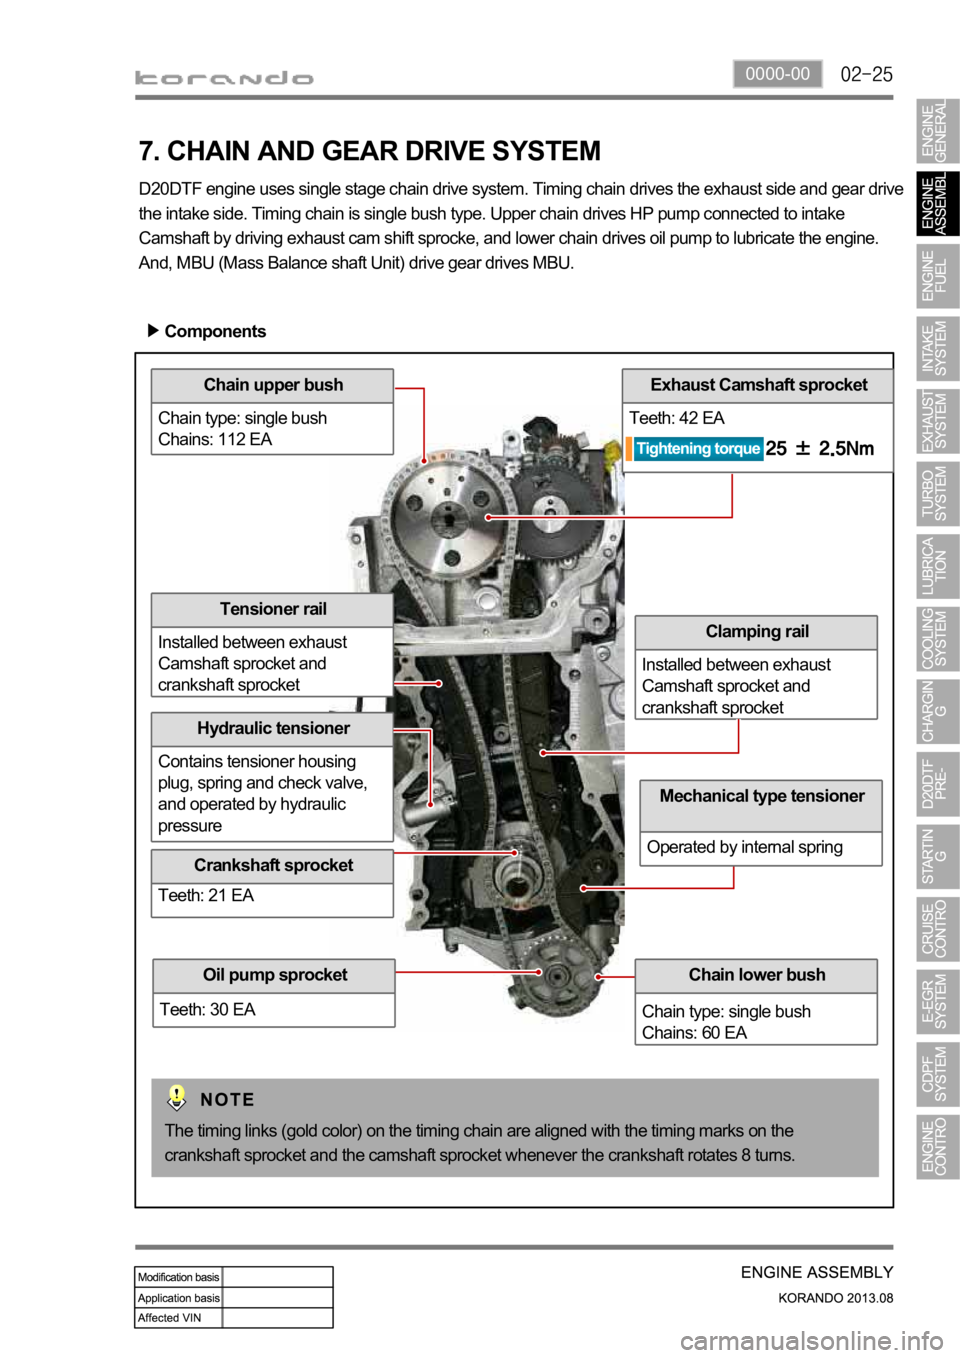 SSANGYONG KORANDO 2013  Service Manual 0000-00
Chain upper bush
Chain type: single bush
Chains: 112 EA
Hydraulic tensioner
Contains tensioner housing 
plug, spring and check valve, 
and operated by hydraulic 
pressure
Exhaust Camshaft spro